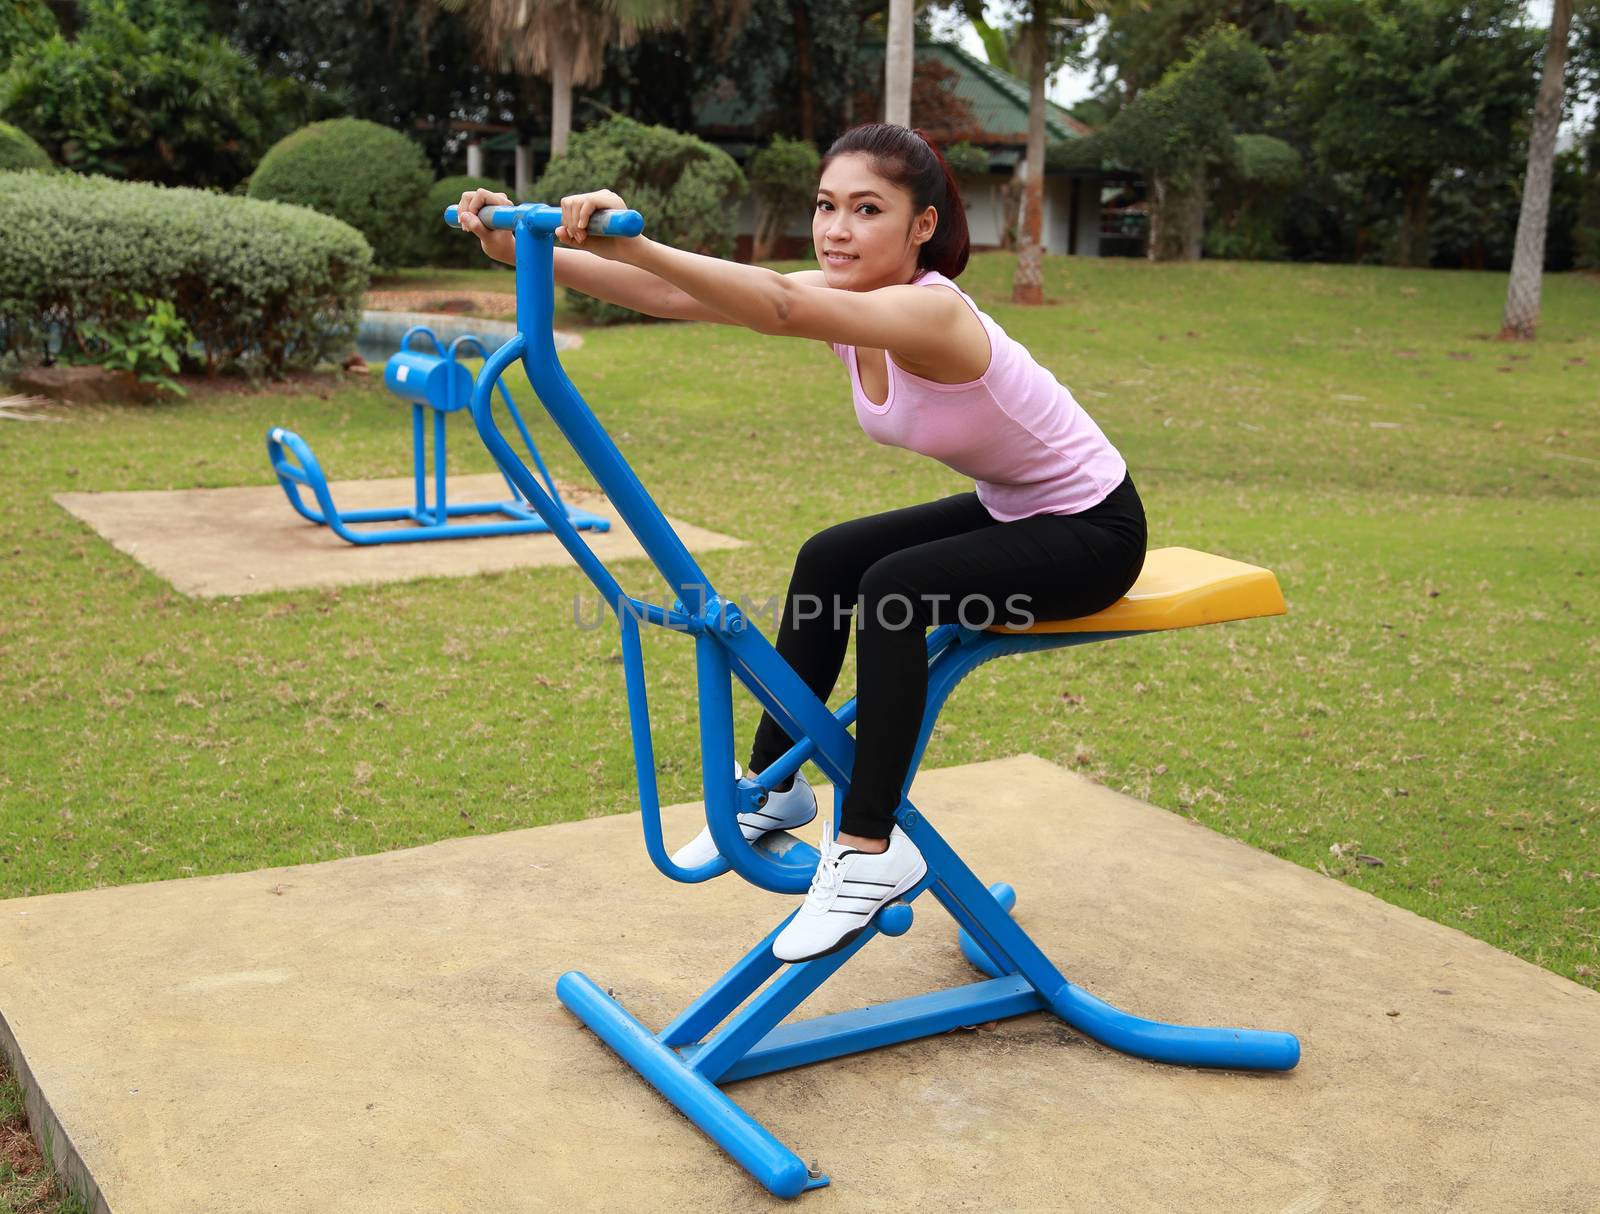 woman exercising with exercise equipment in the public park